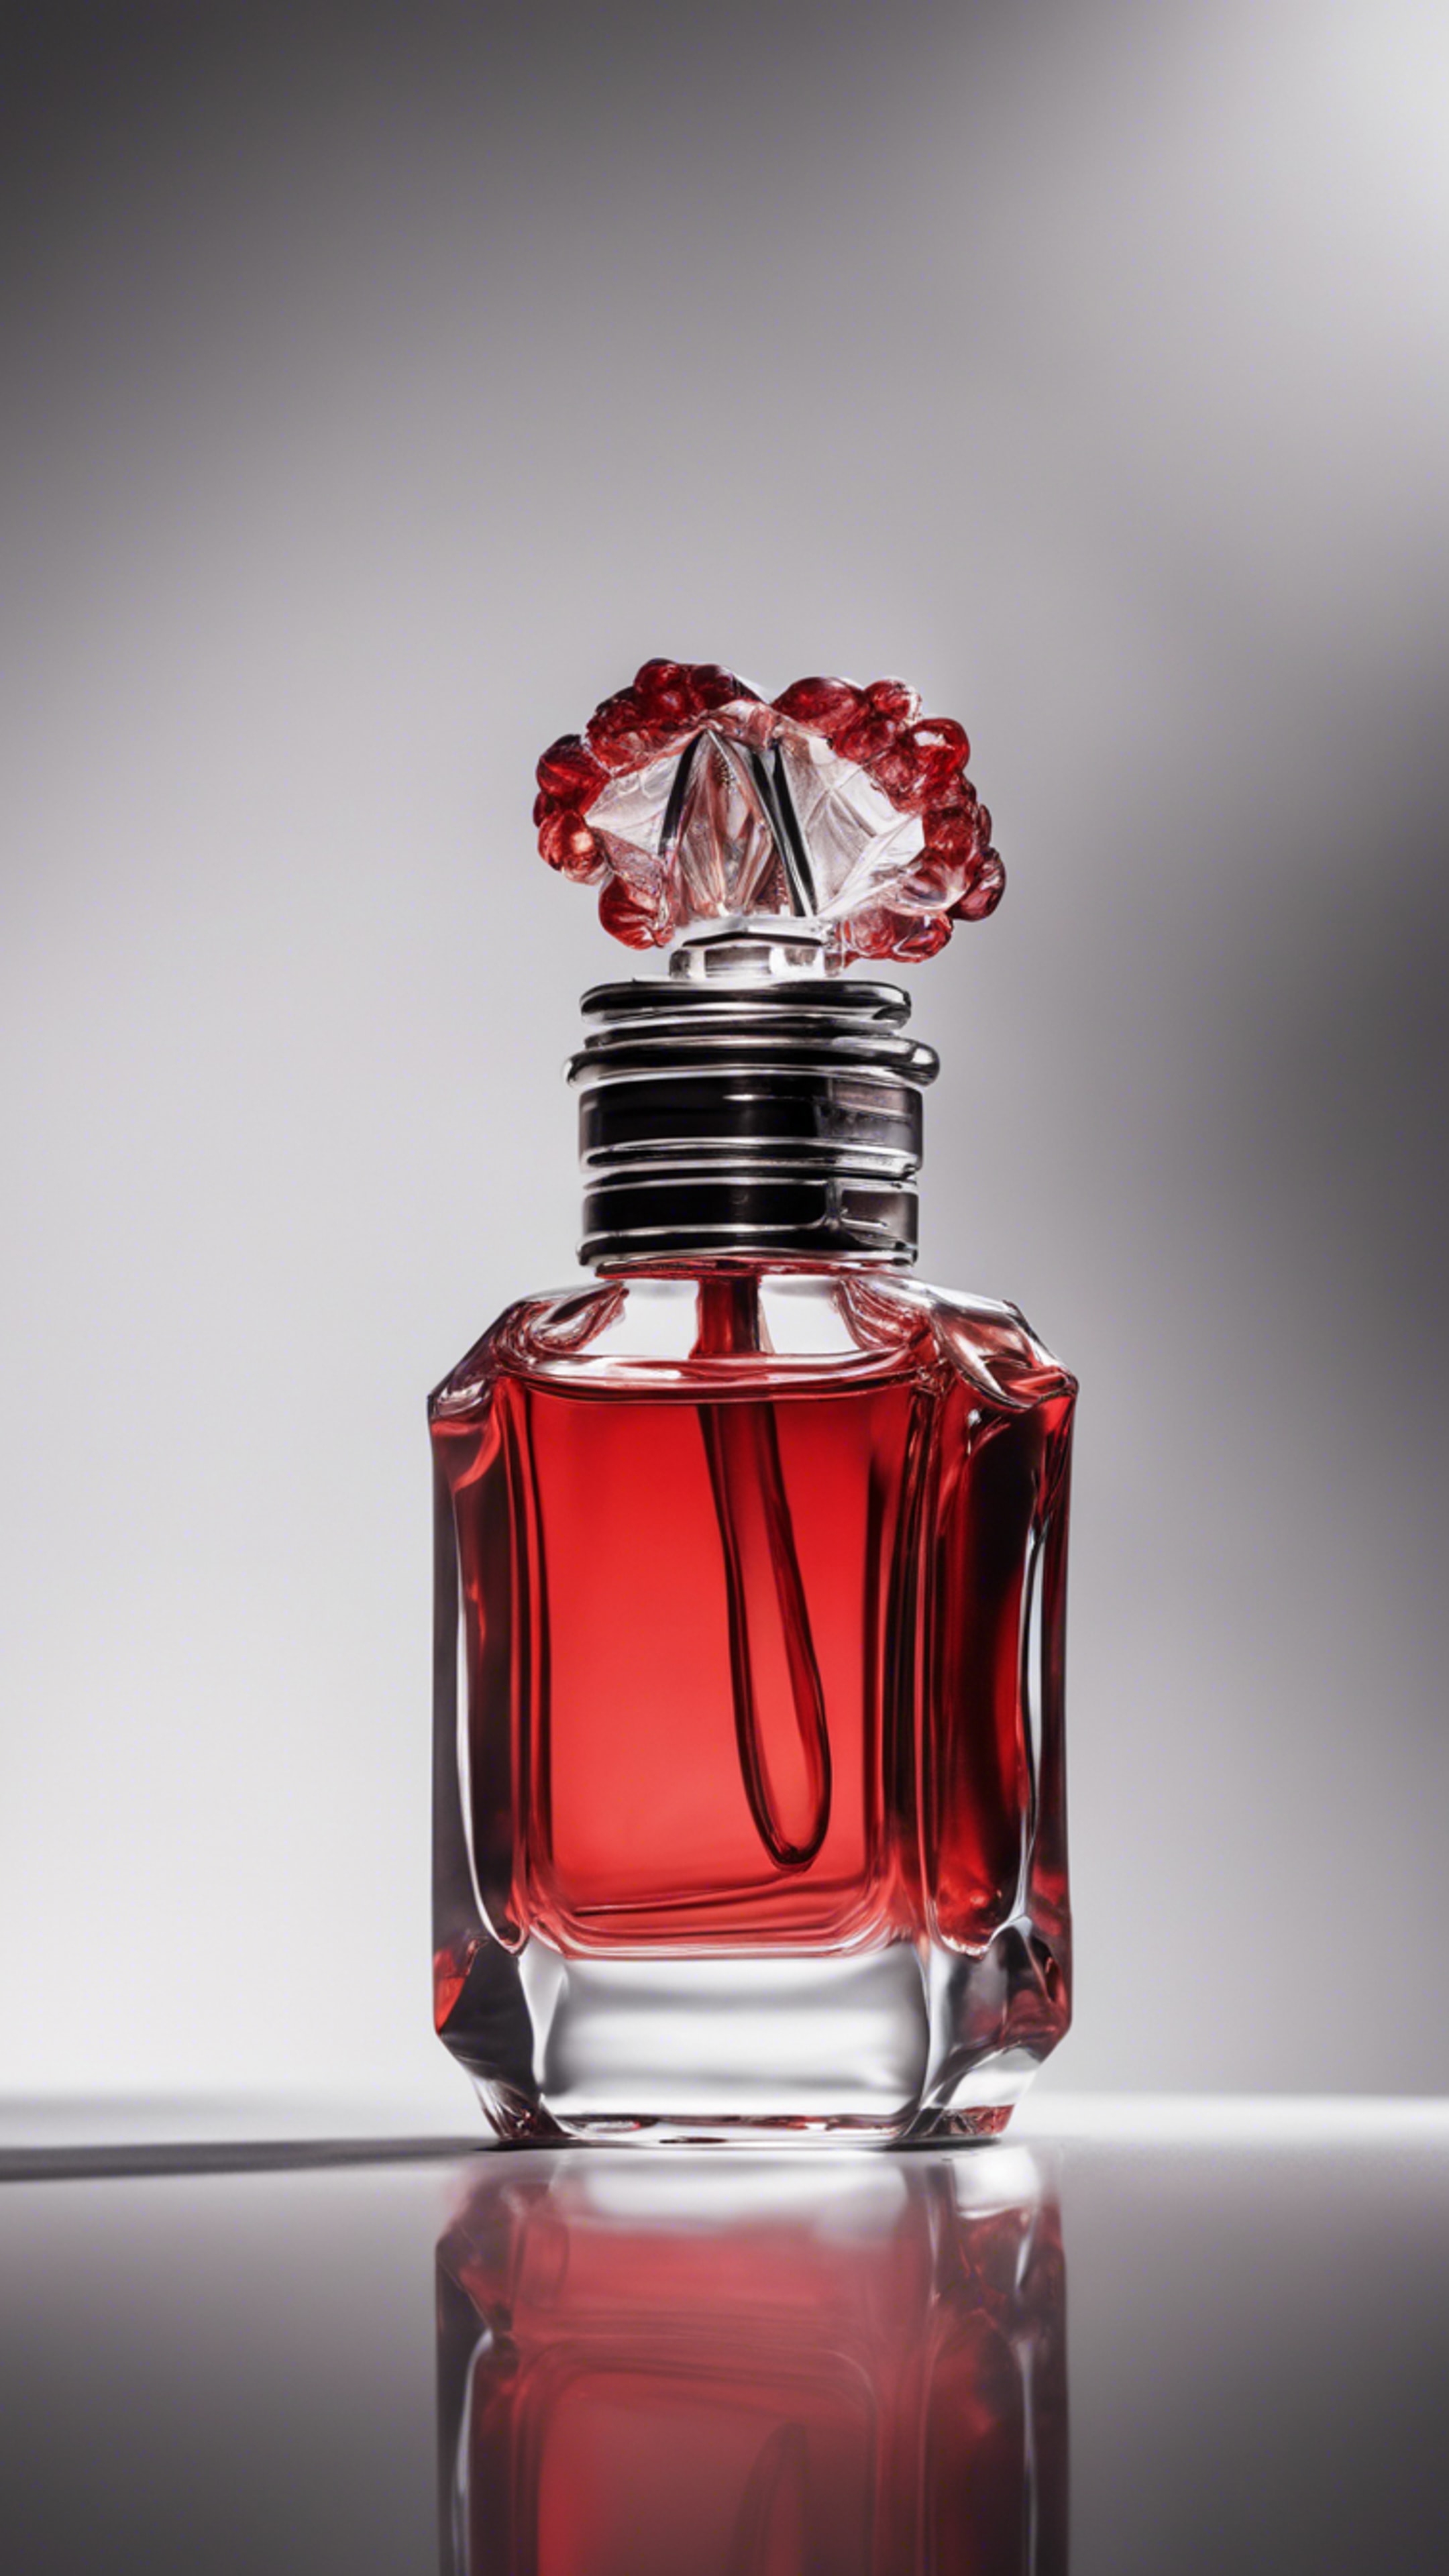 The portrait of a sassy red perfume bottle clashing against a pure white backdrop.壁紙[8445b62606744831bb5a]